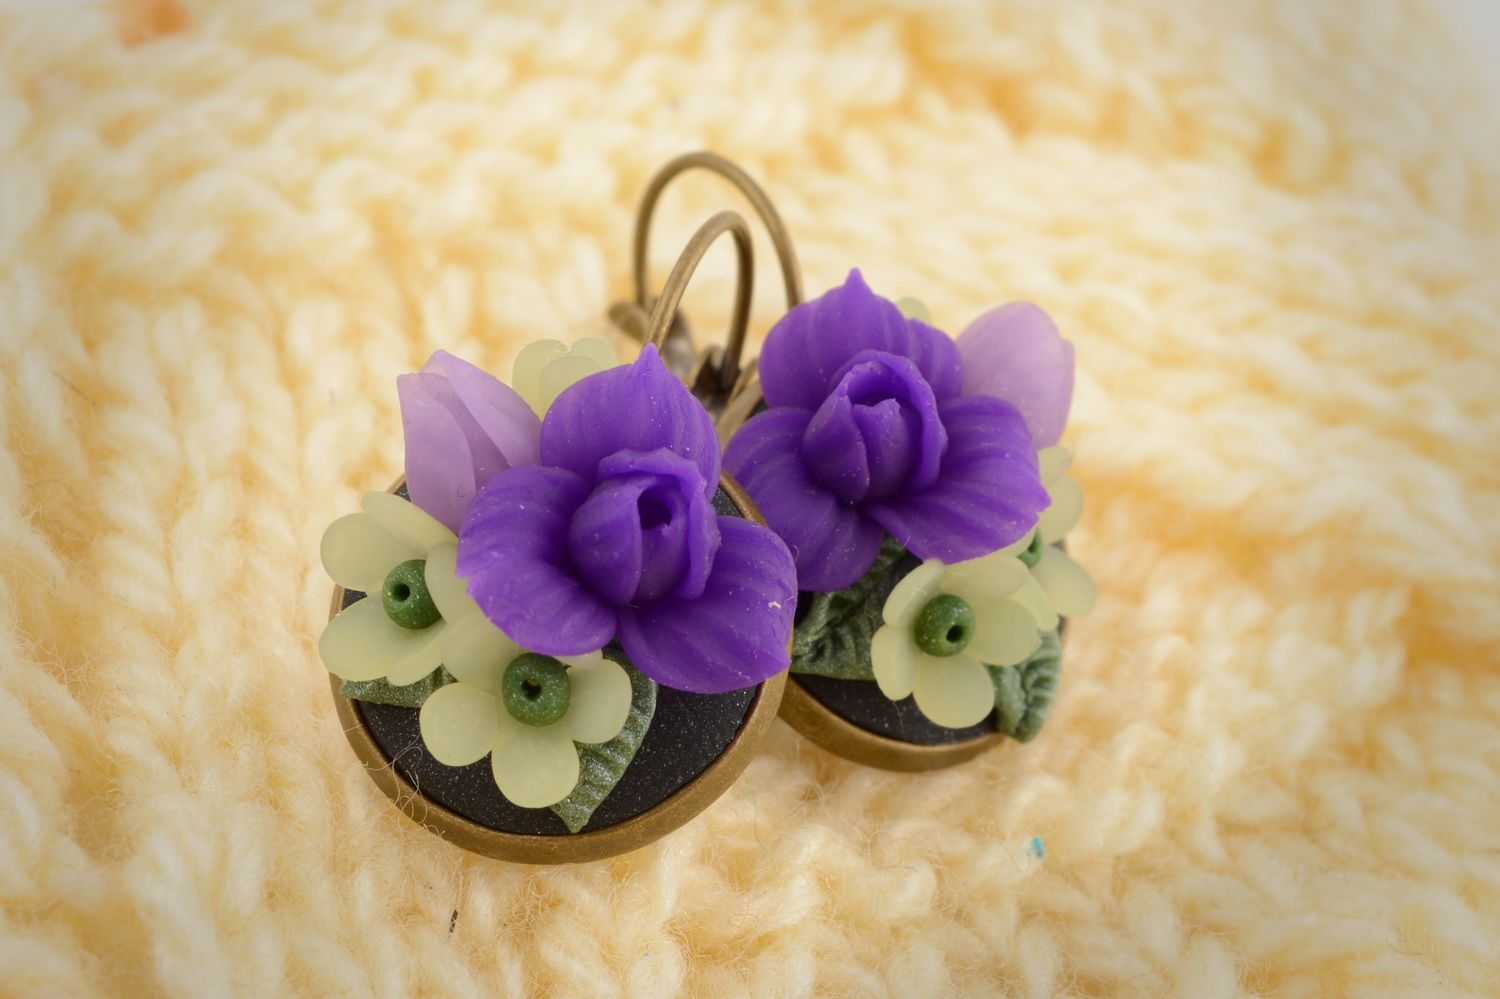 Handmade stylish festive cute earrings made of polymer clay with flowers photo 1